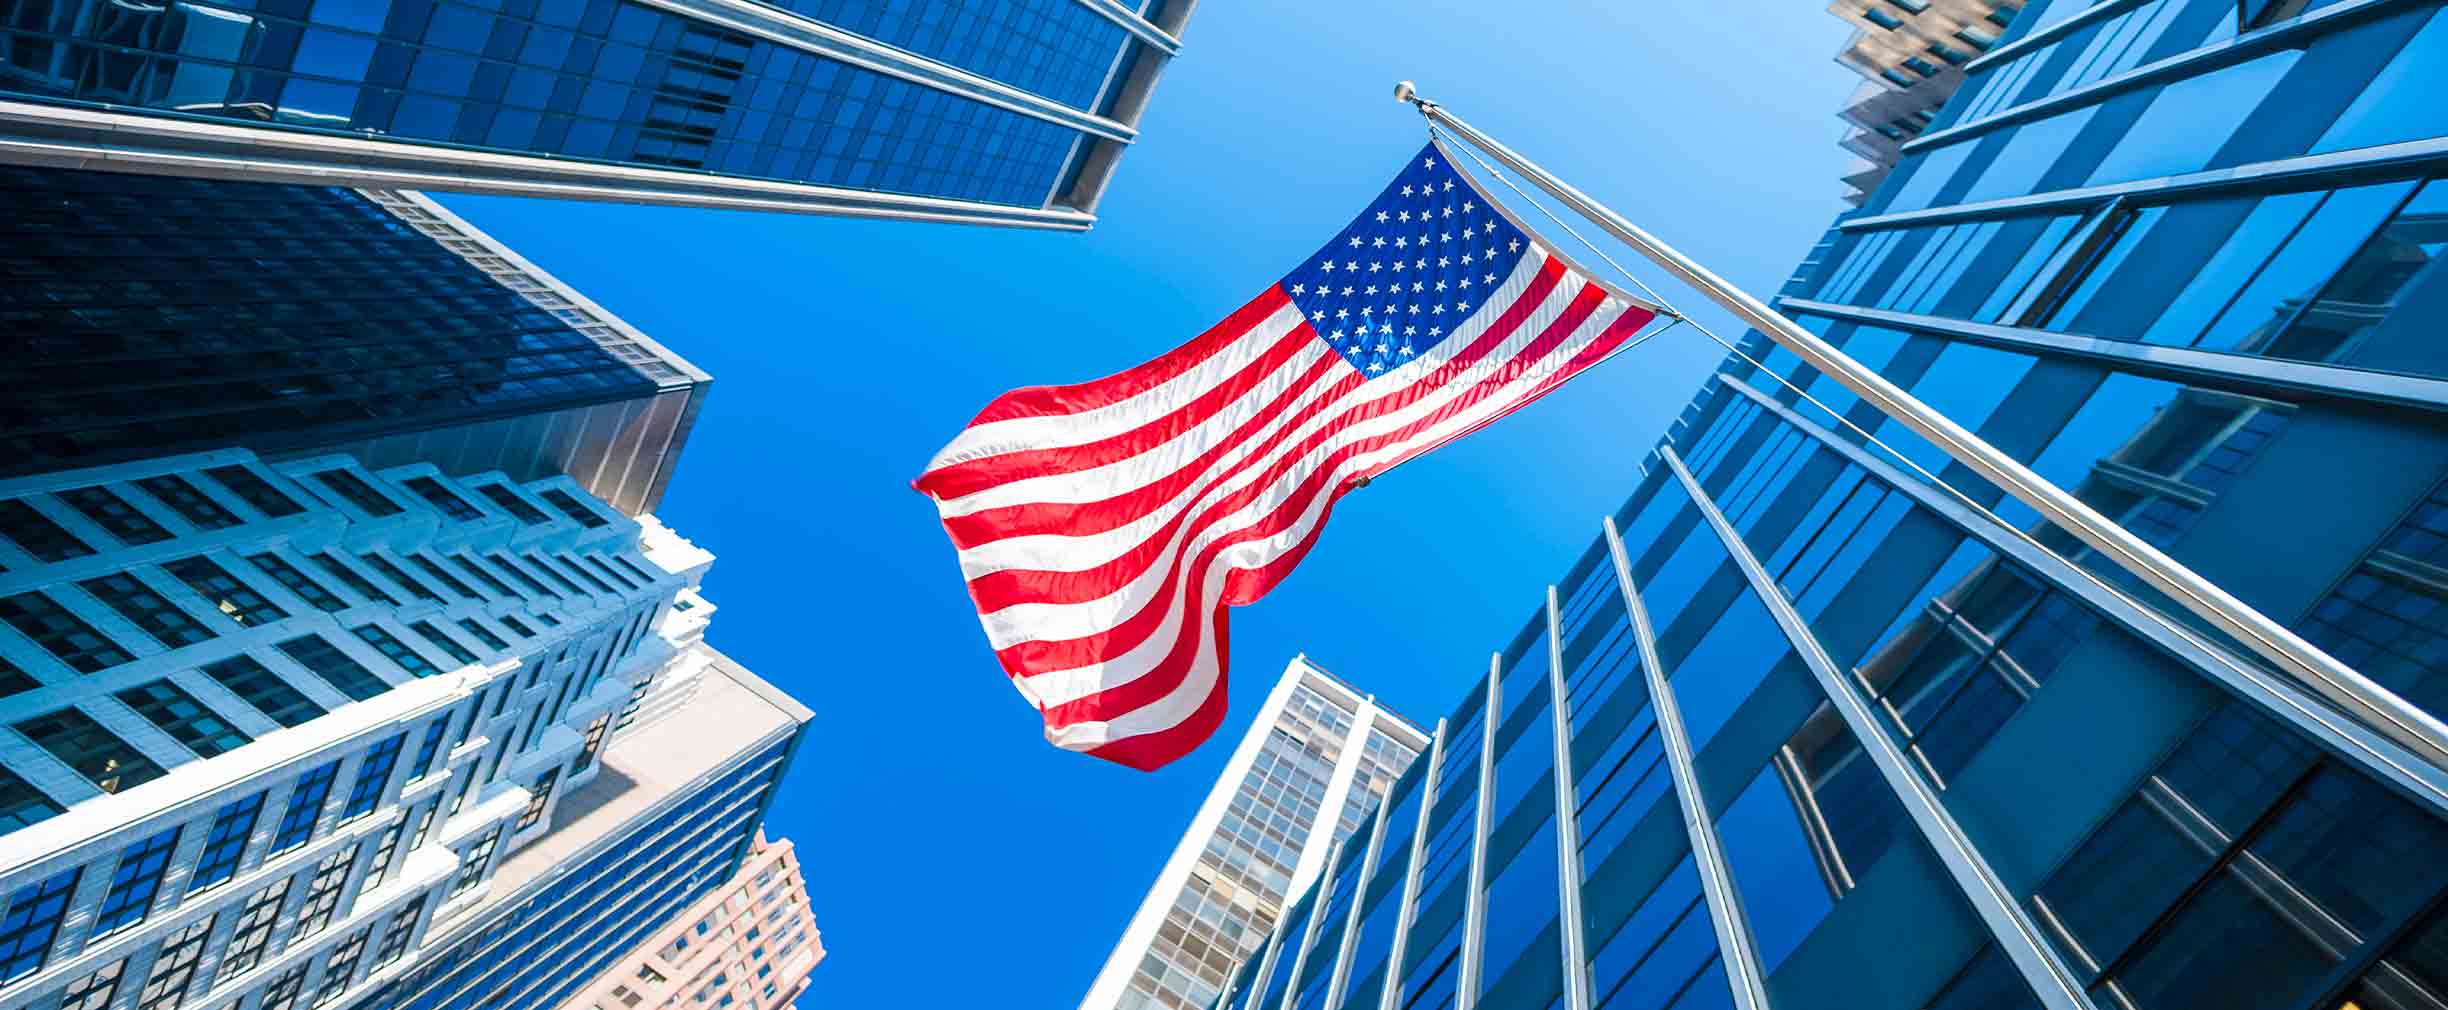 View of an American flag blowing in the wind, with tall buildings around it.